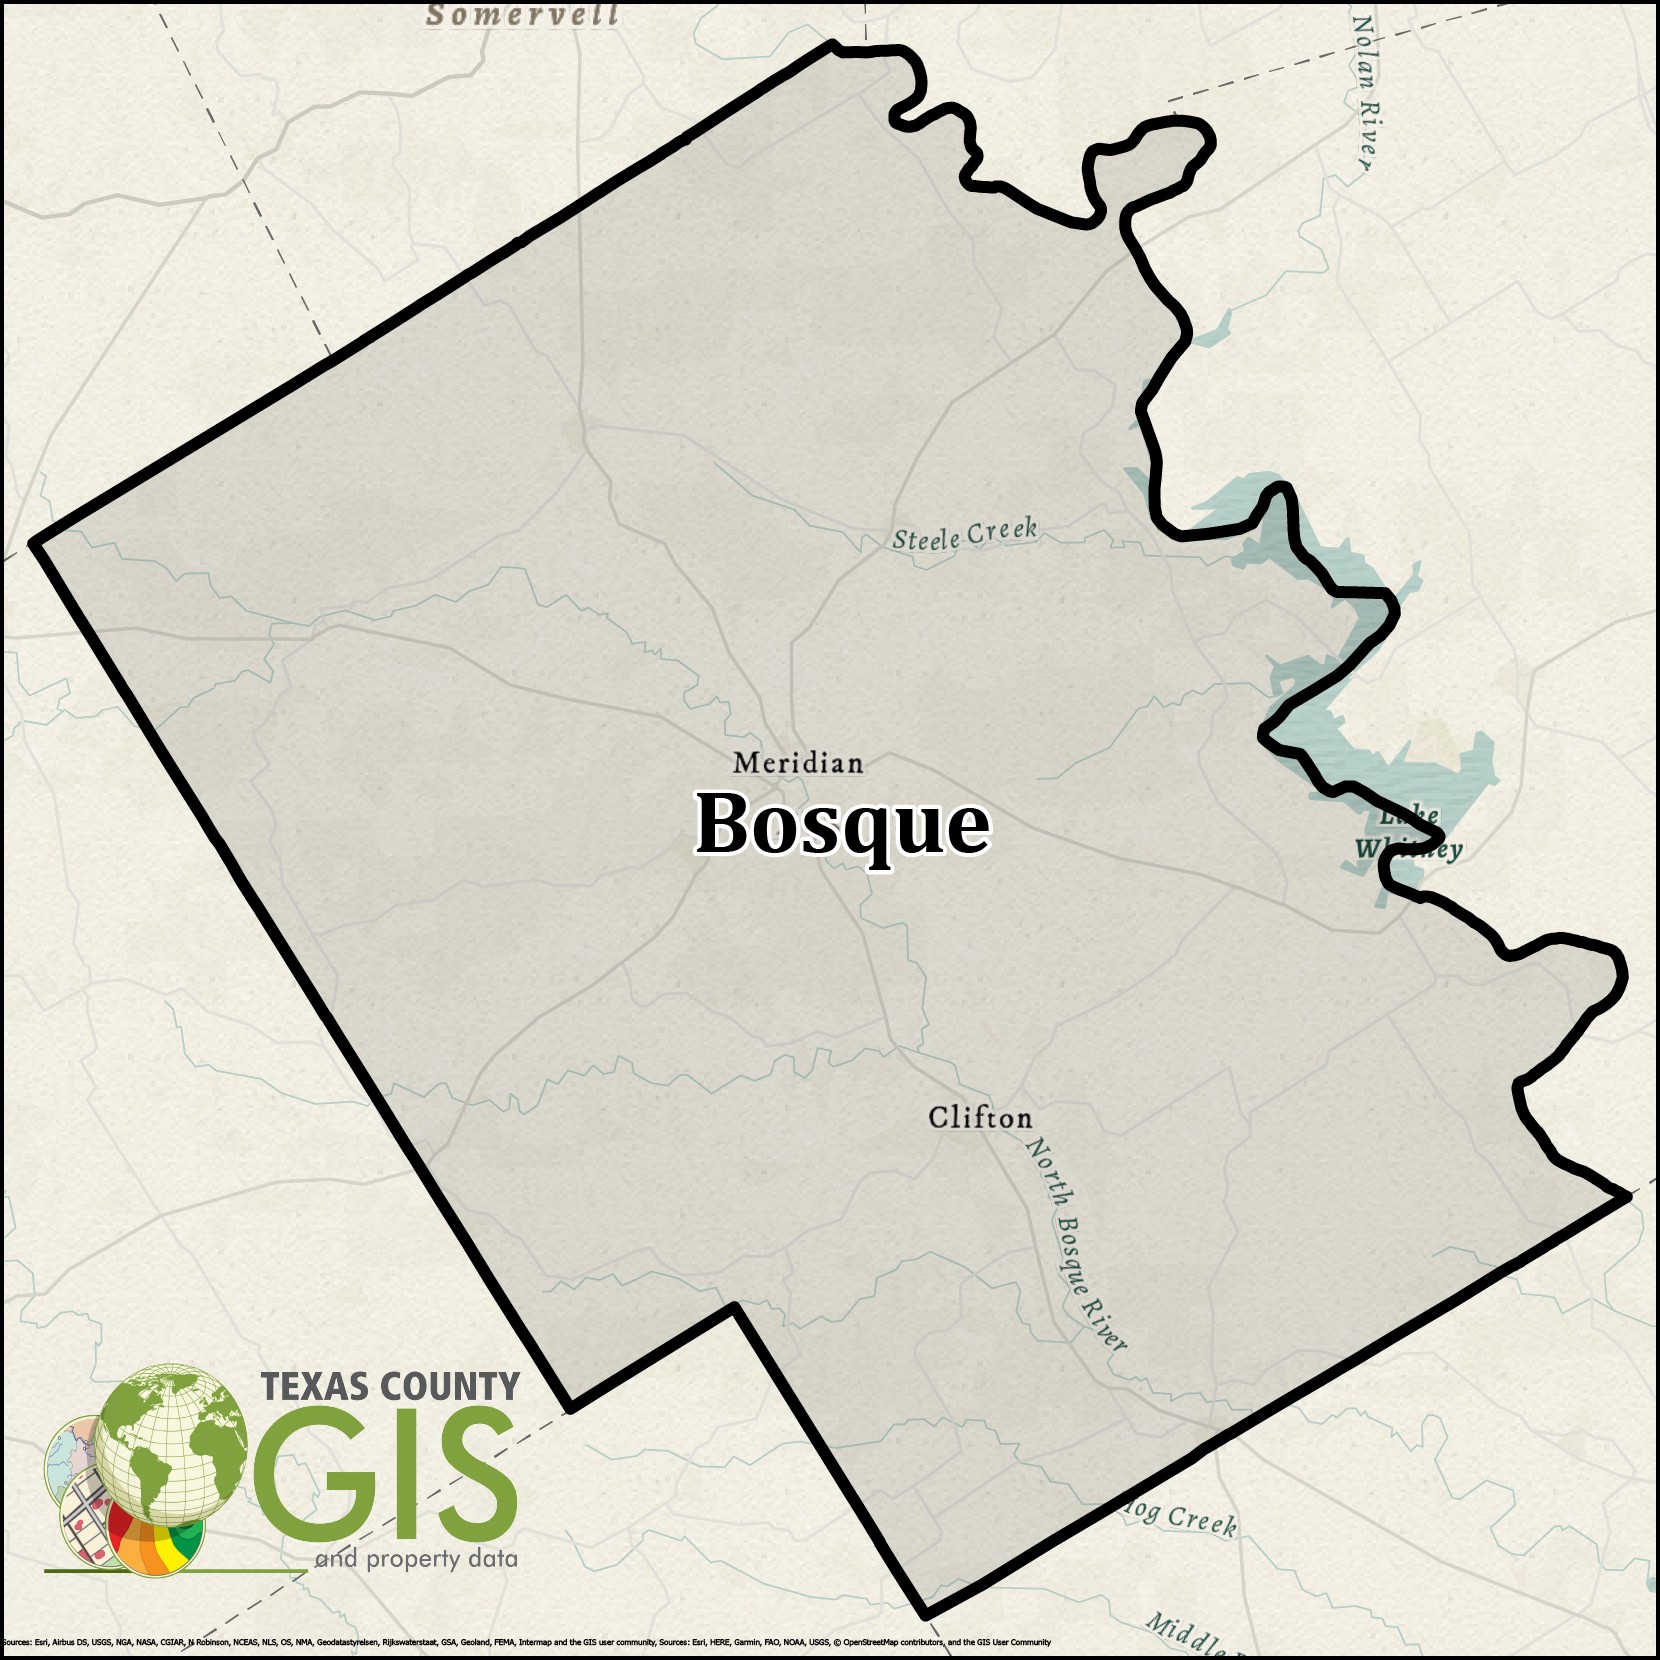 Bosque County GIS Shapefile and Property Data - Texas County GIS Data